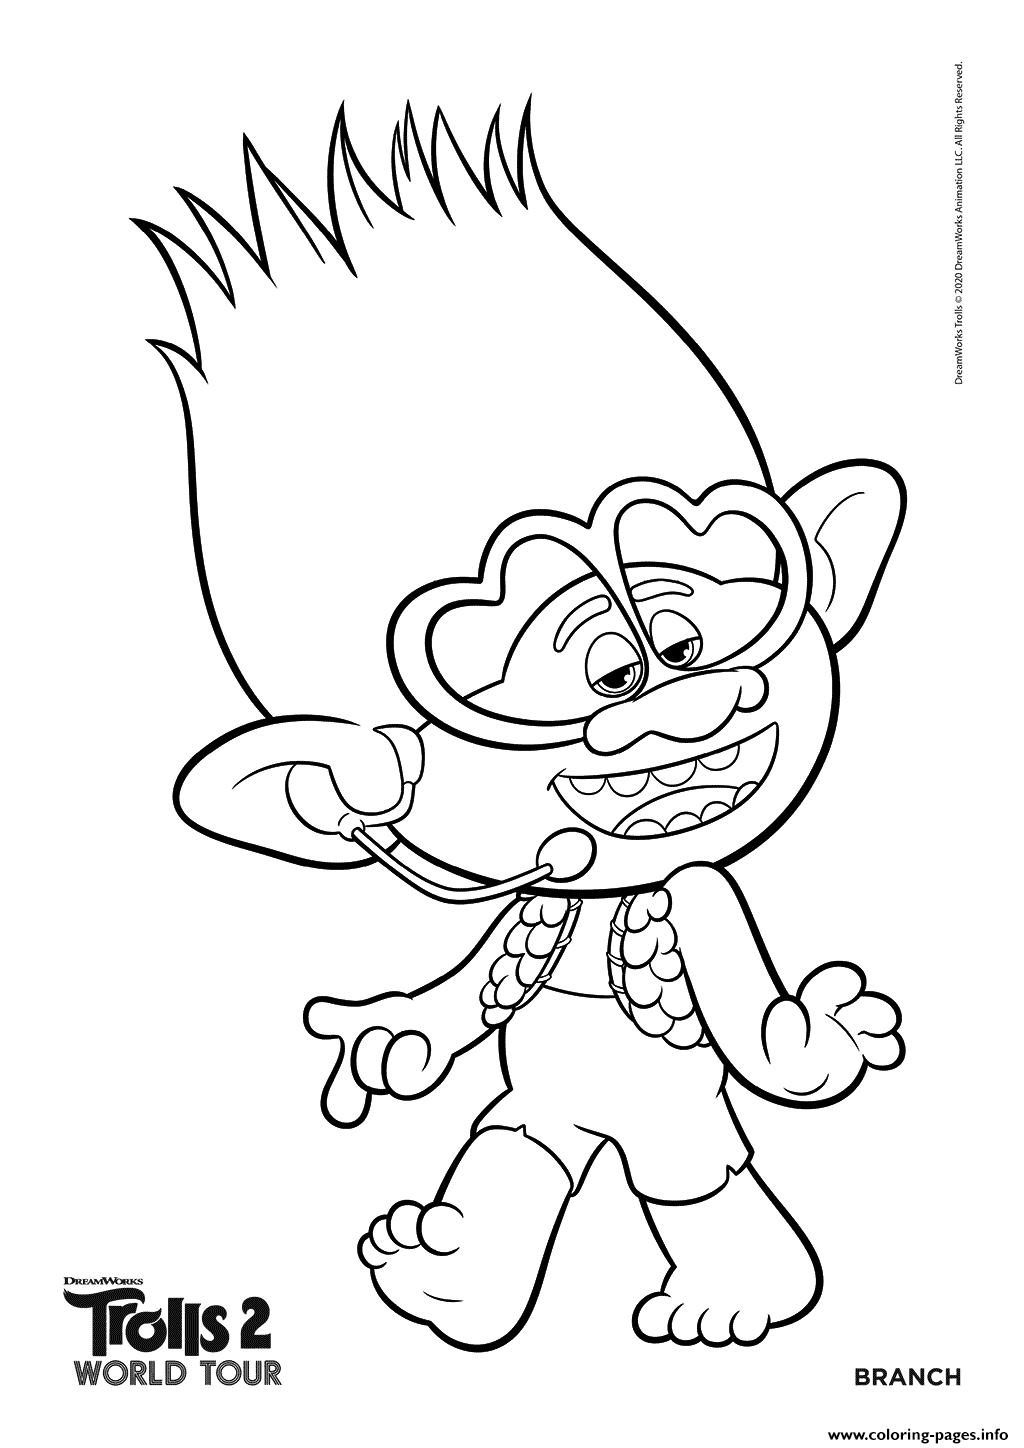 Trolls 2 Branch World Tour Coloring page Printable